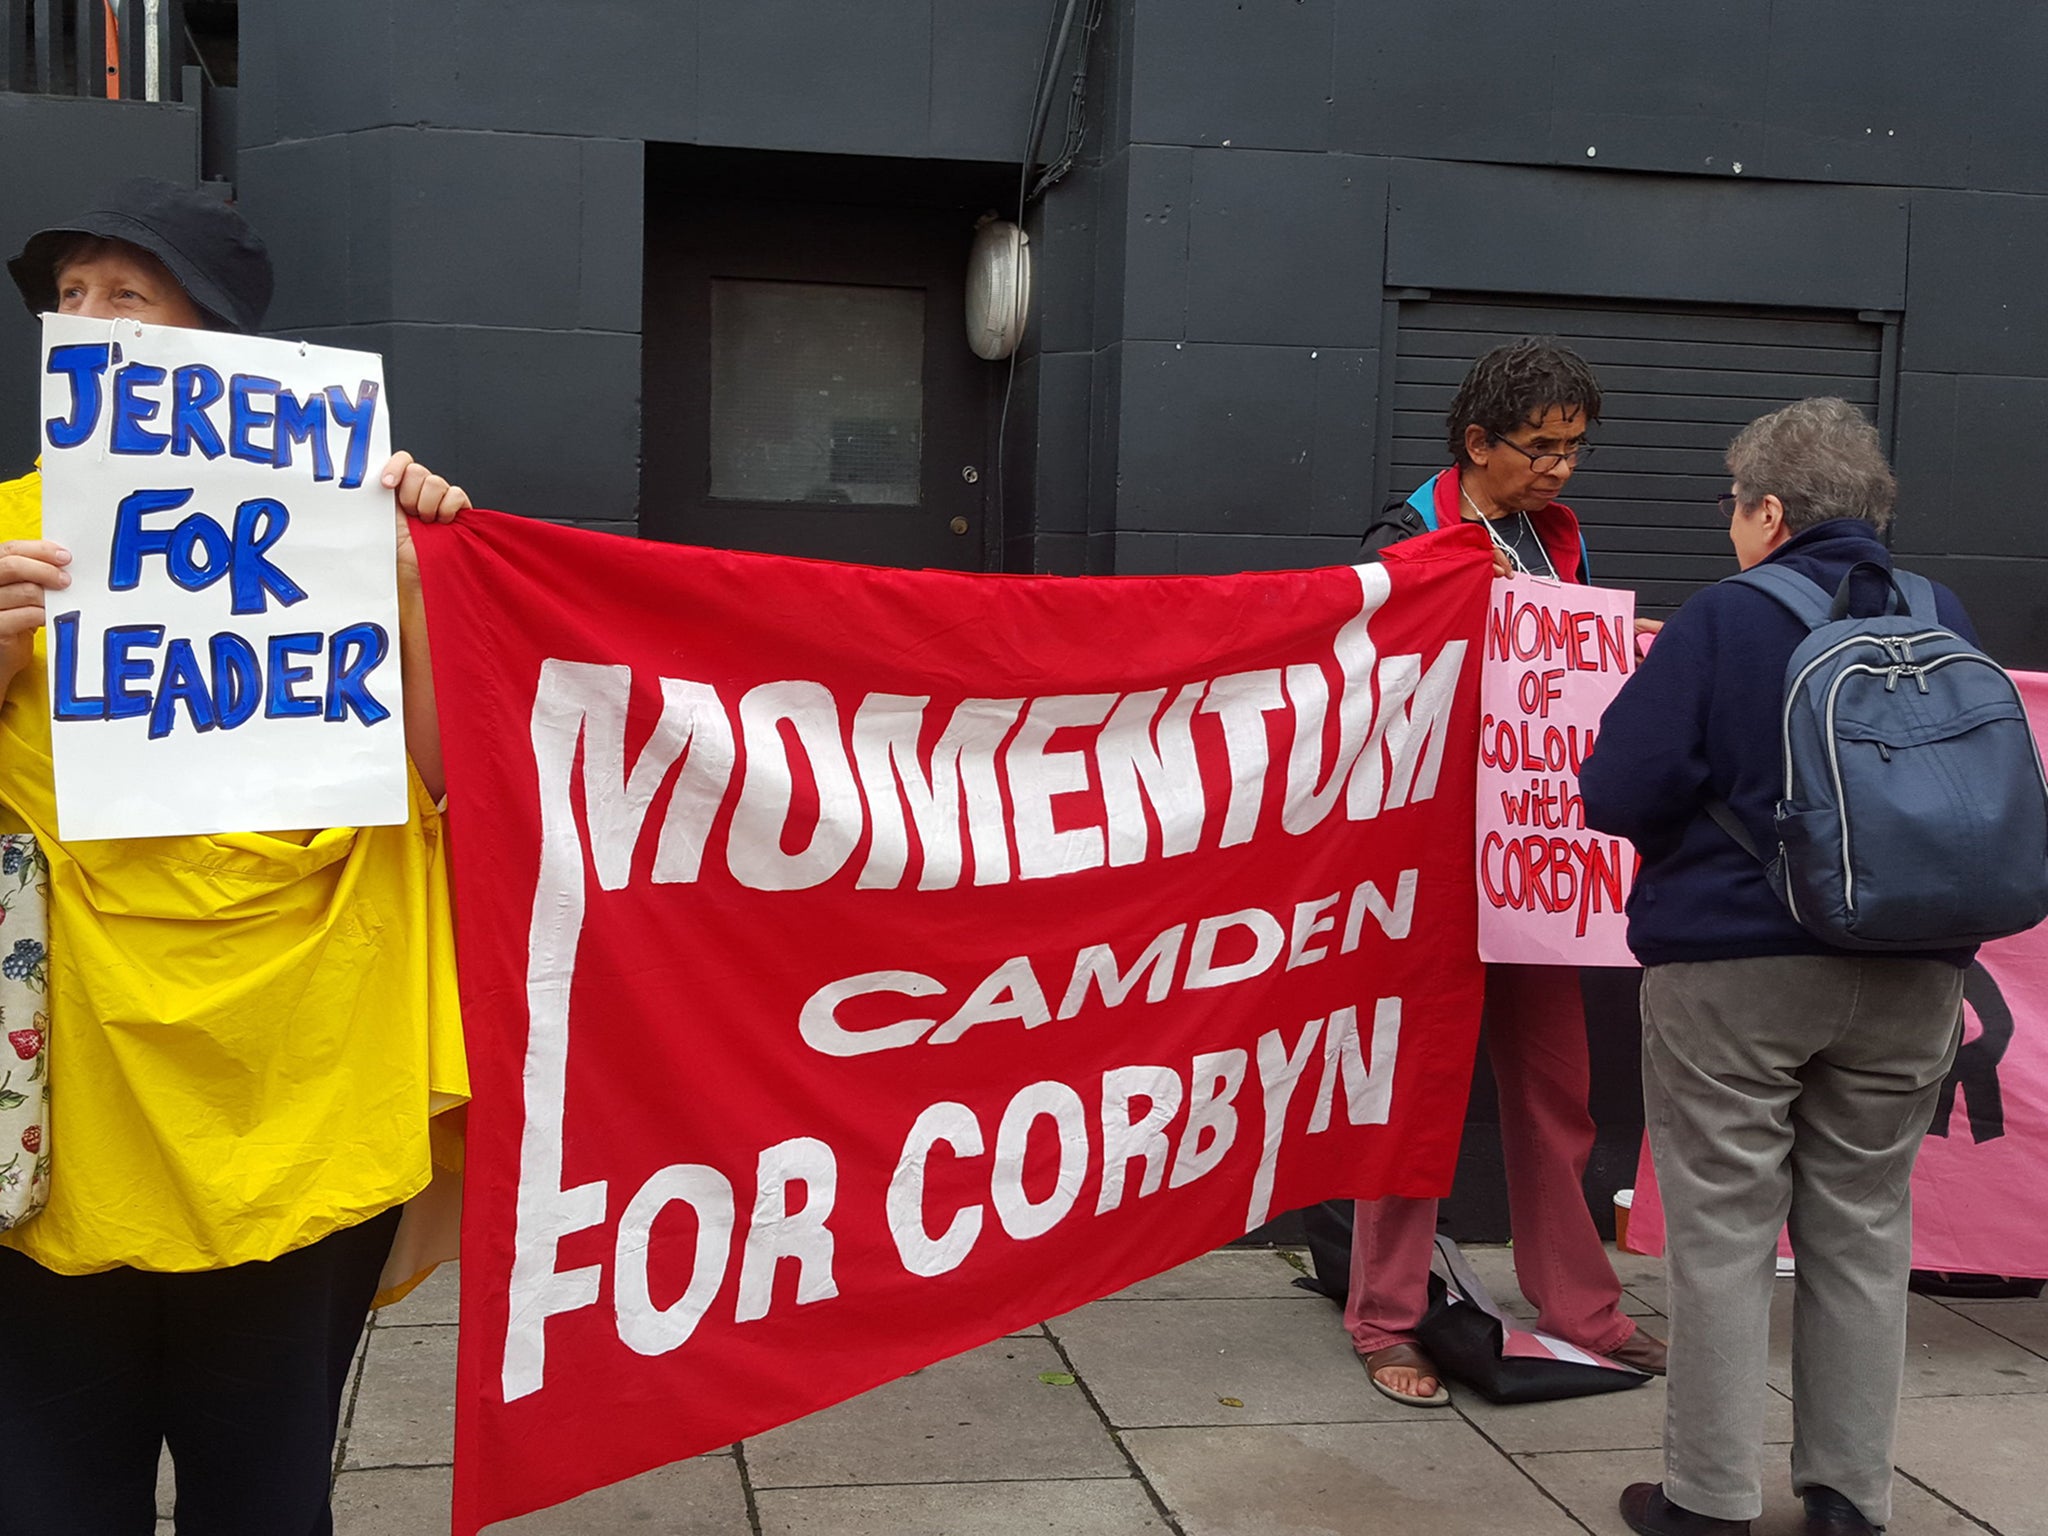 Supporters of Labour leader Jeremy Corbyn outside the O2 Forum Kentish Town